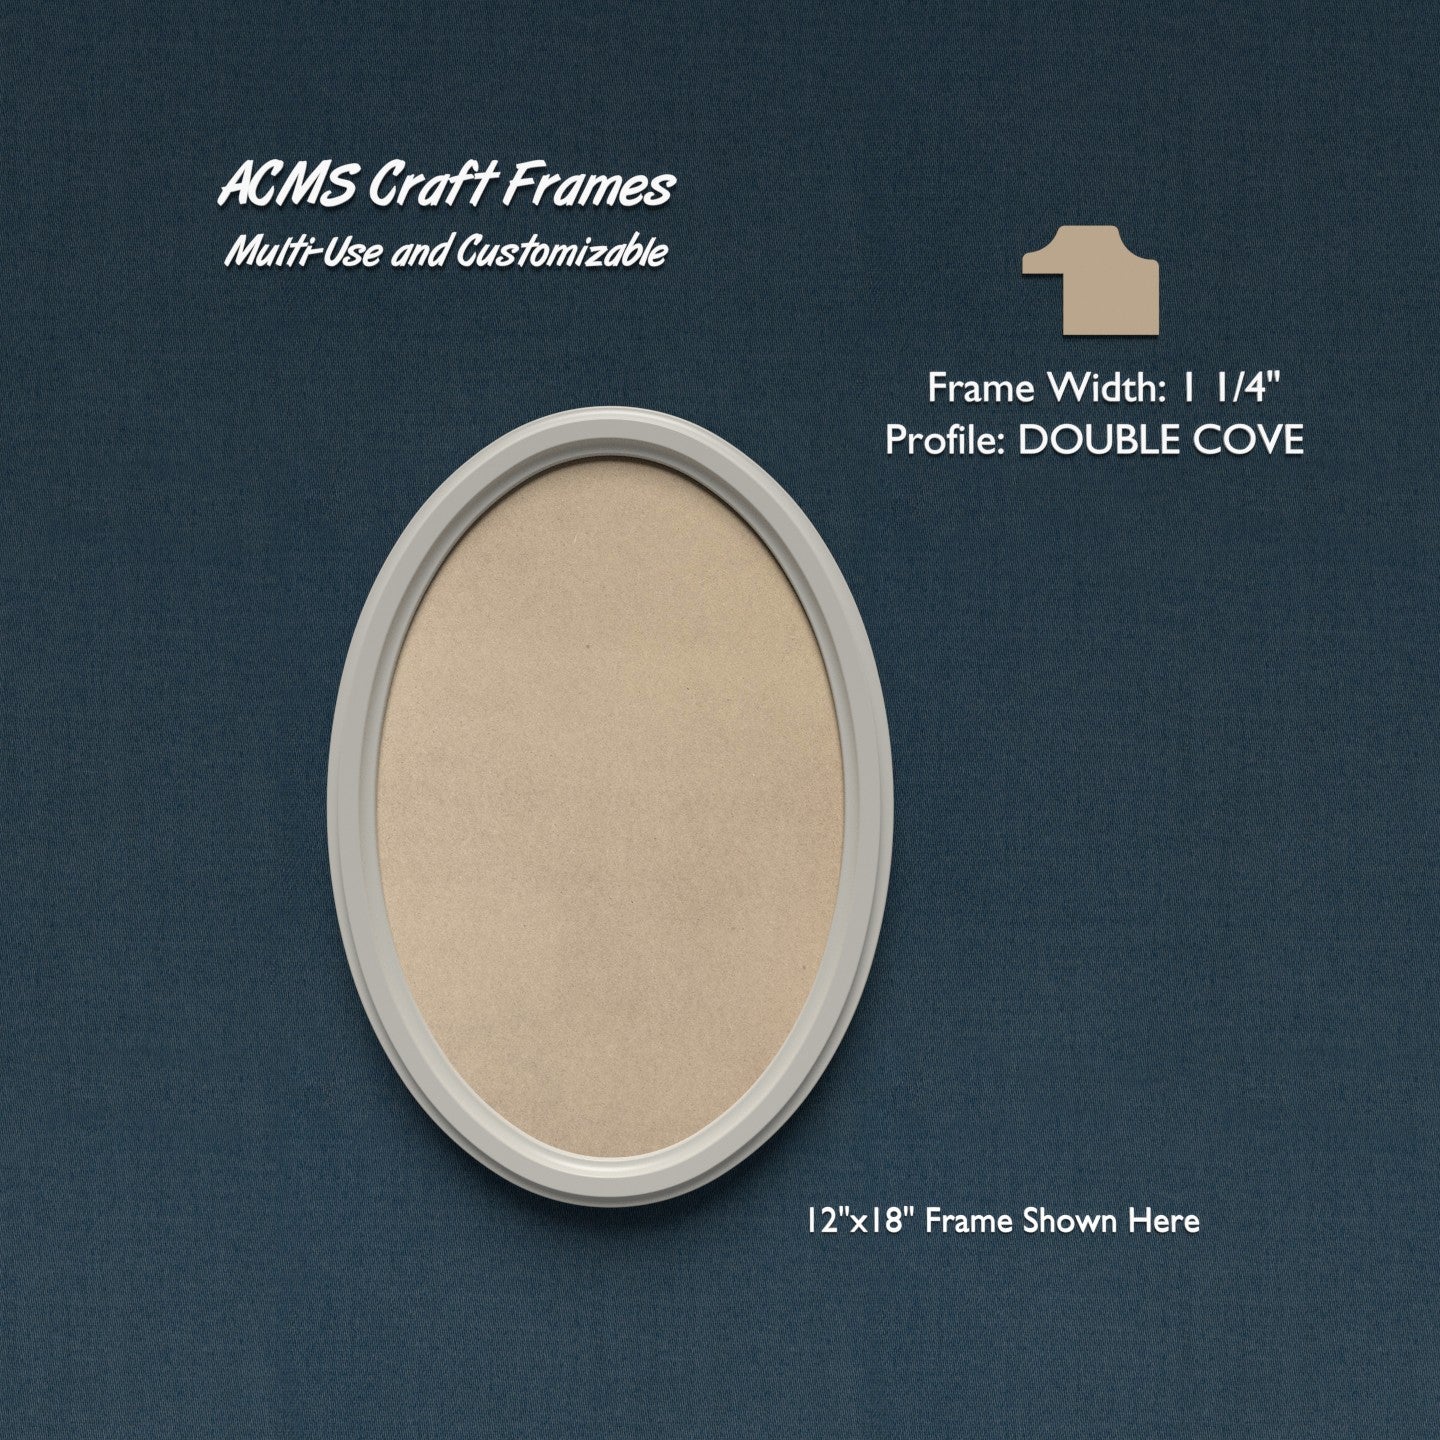 Oval Craft Frame - DOUBLE COVE Profile - 1 1/4" Frame Width - 1" Thick